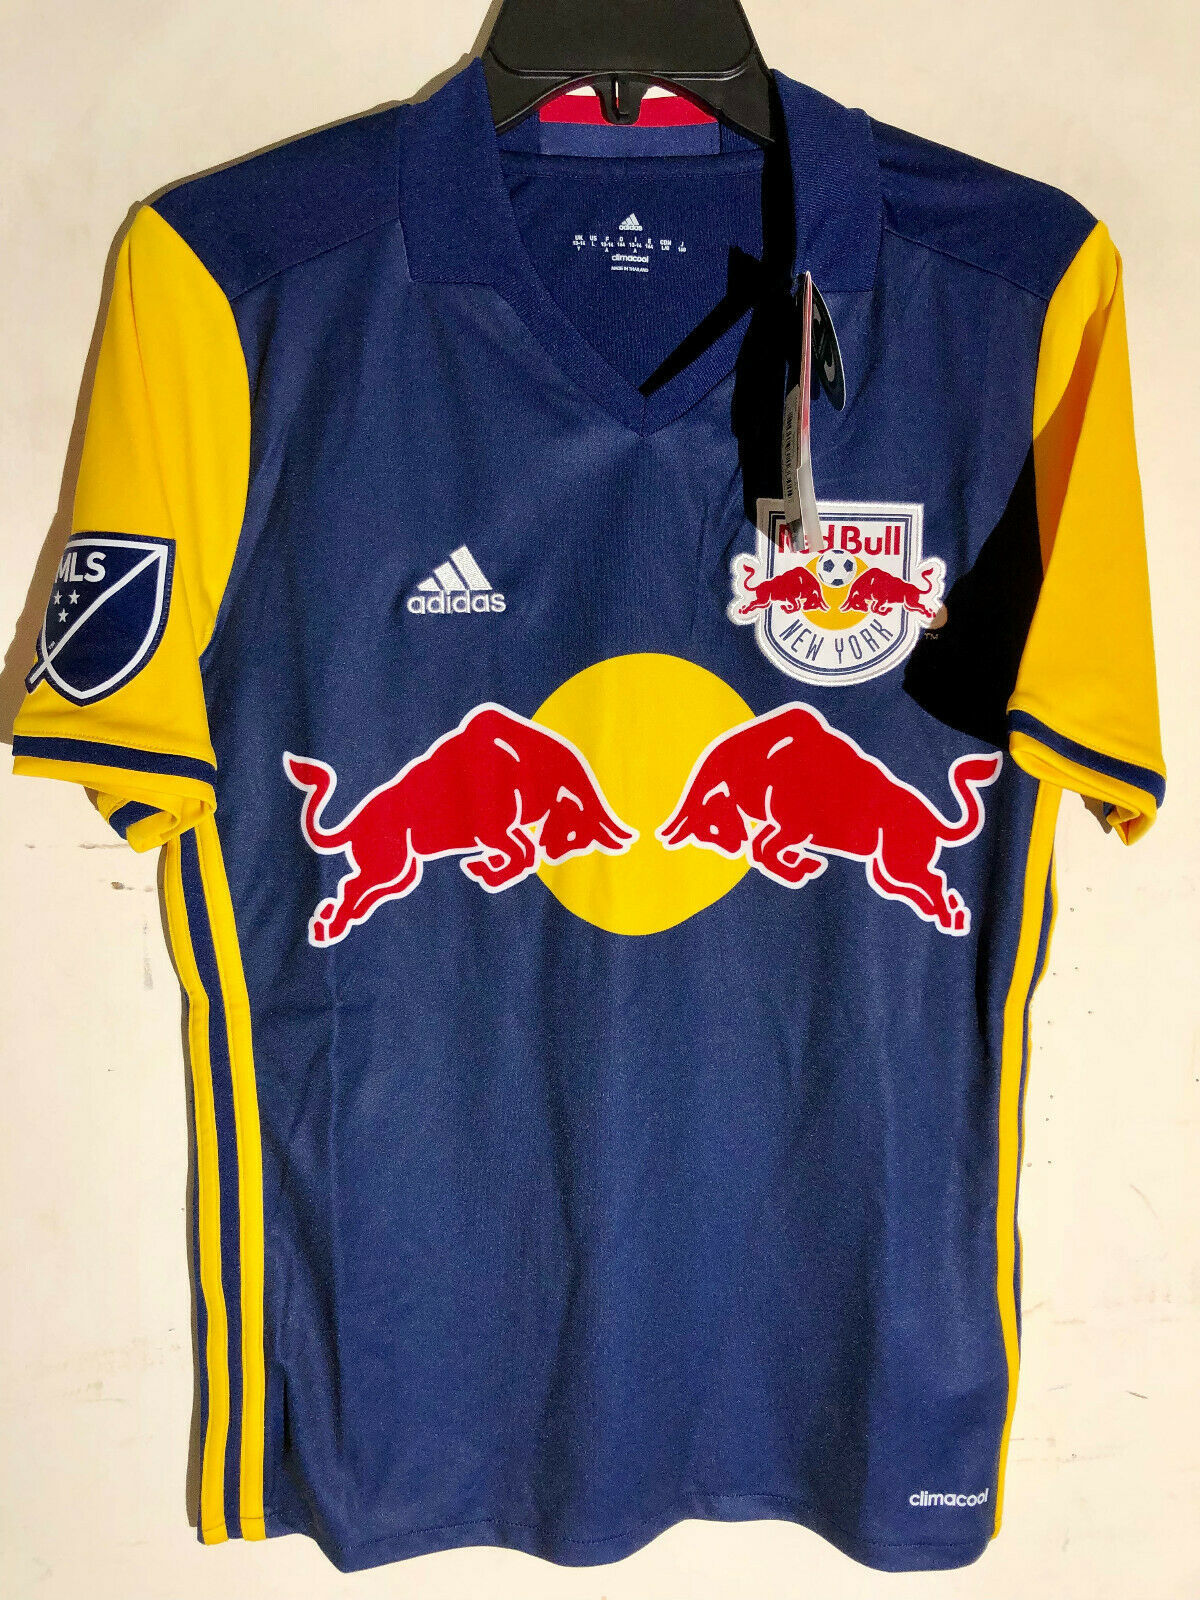 Adidas Youth MLS Jersey NY Red Bulls Team Navy Blue sz S- show original title...